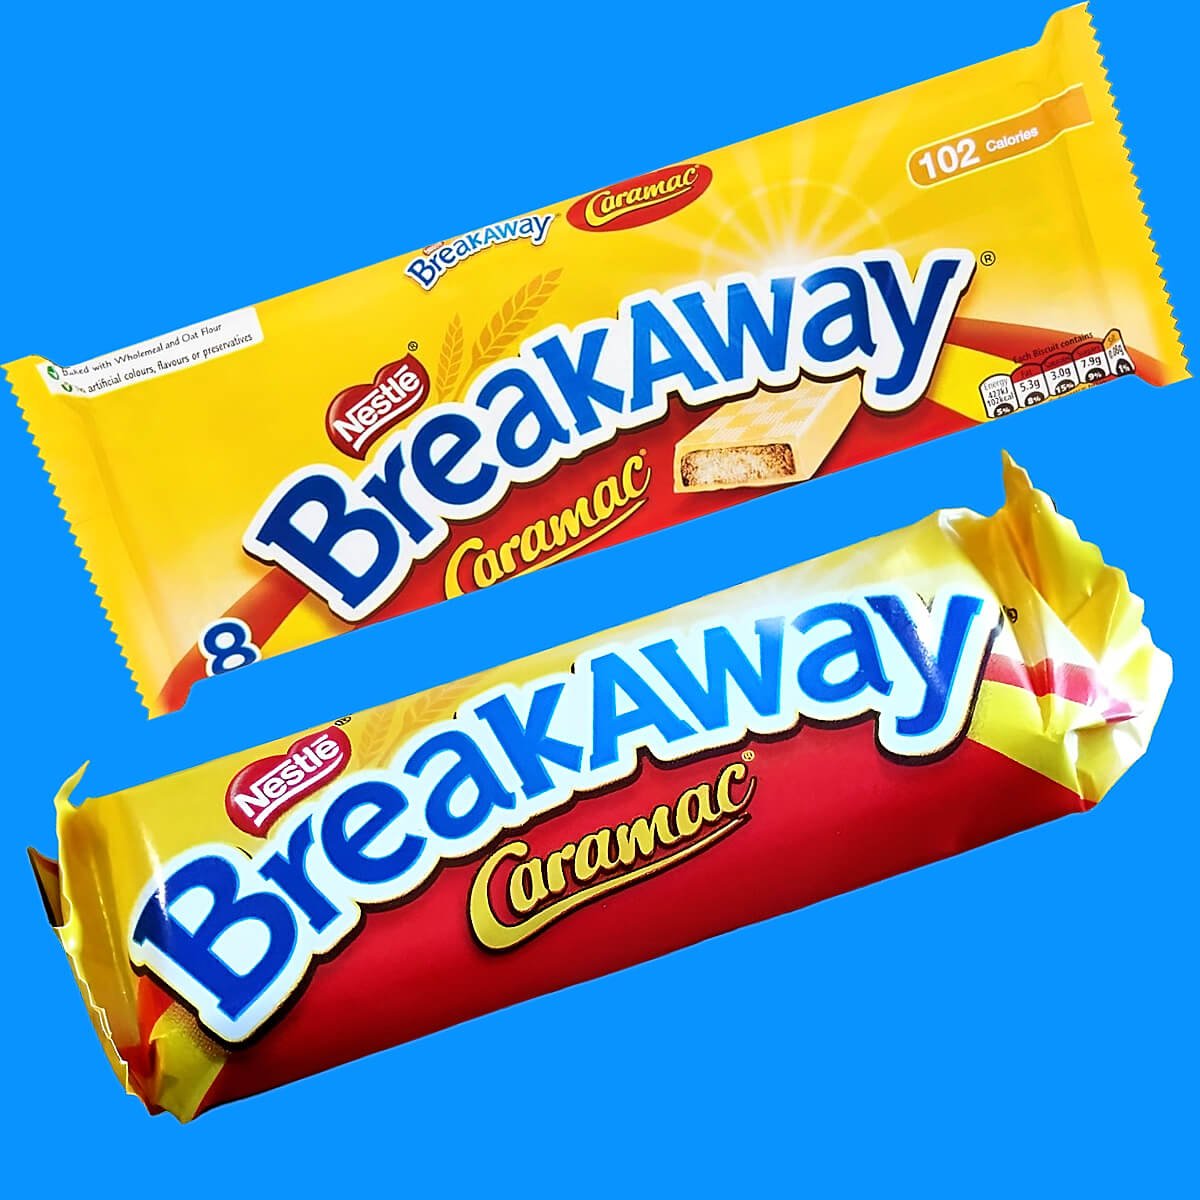 Nestlé Breakaway Caramac, 8 pack with loose bar in wrapper